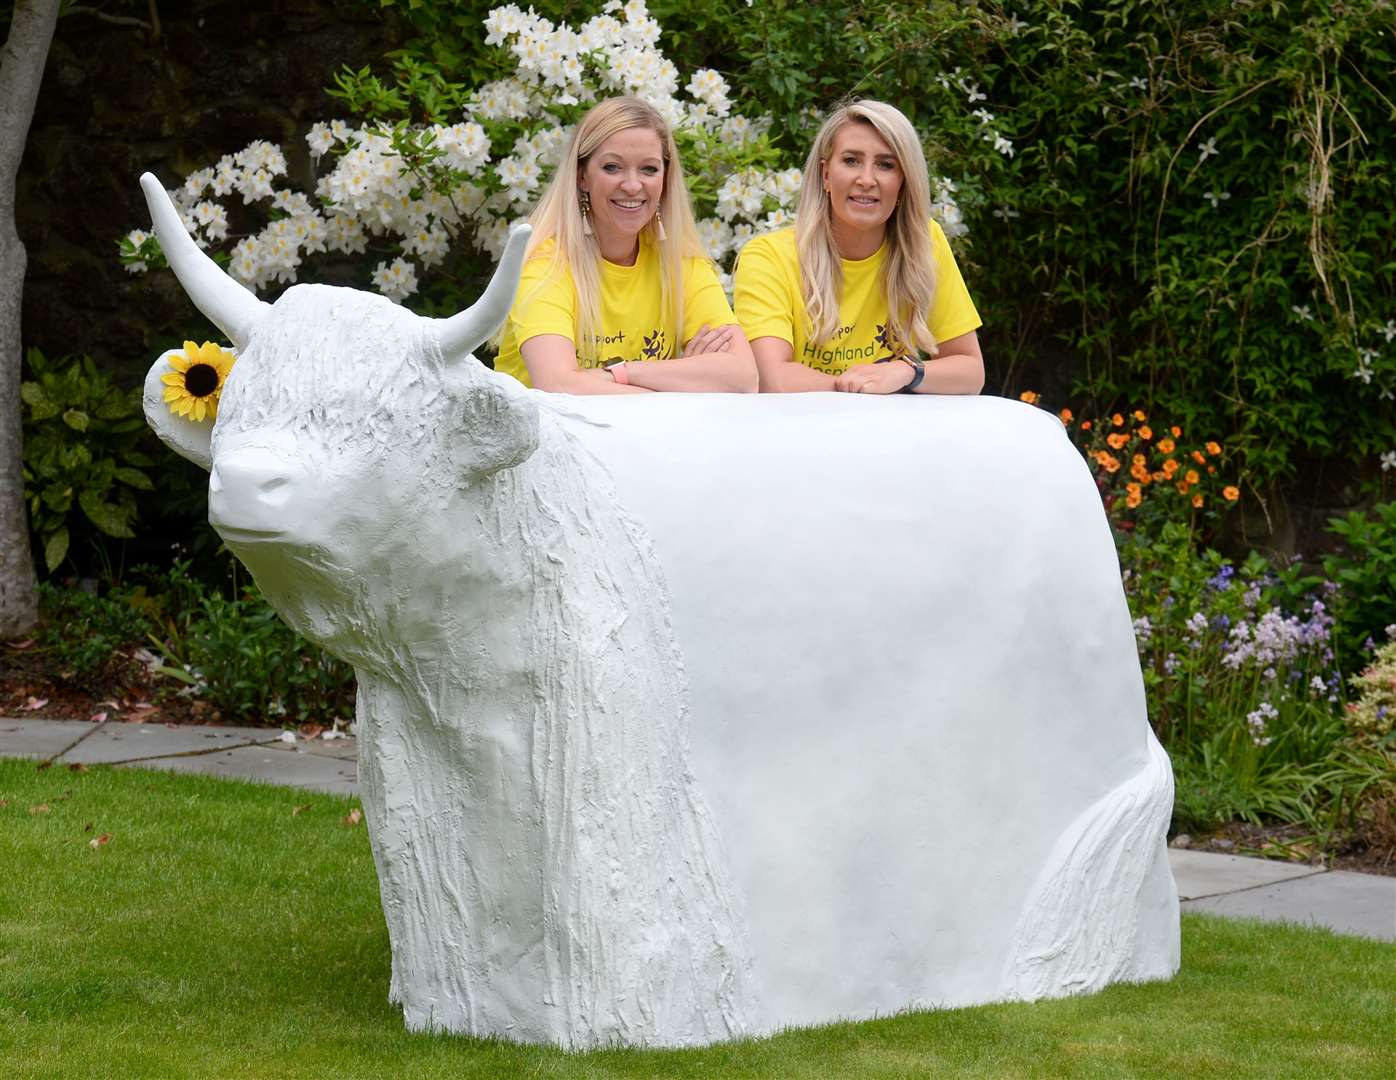 From left, Highland's Hospice's events fundraiser Jenna Hayden and corporate fundraiser Karen Duff with first Coo. The charity is looking for artists to decorate the Great Heilan Coo Art Trail sculptures. Picture: Gary Anthony